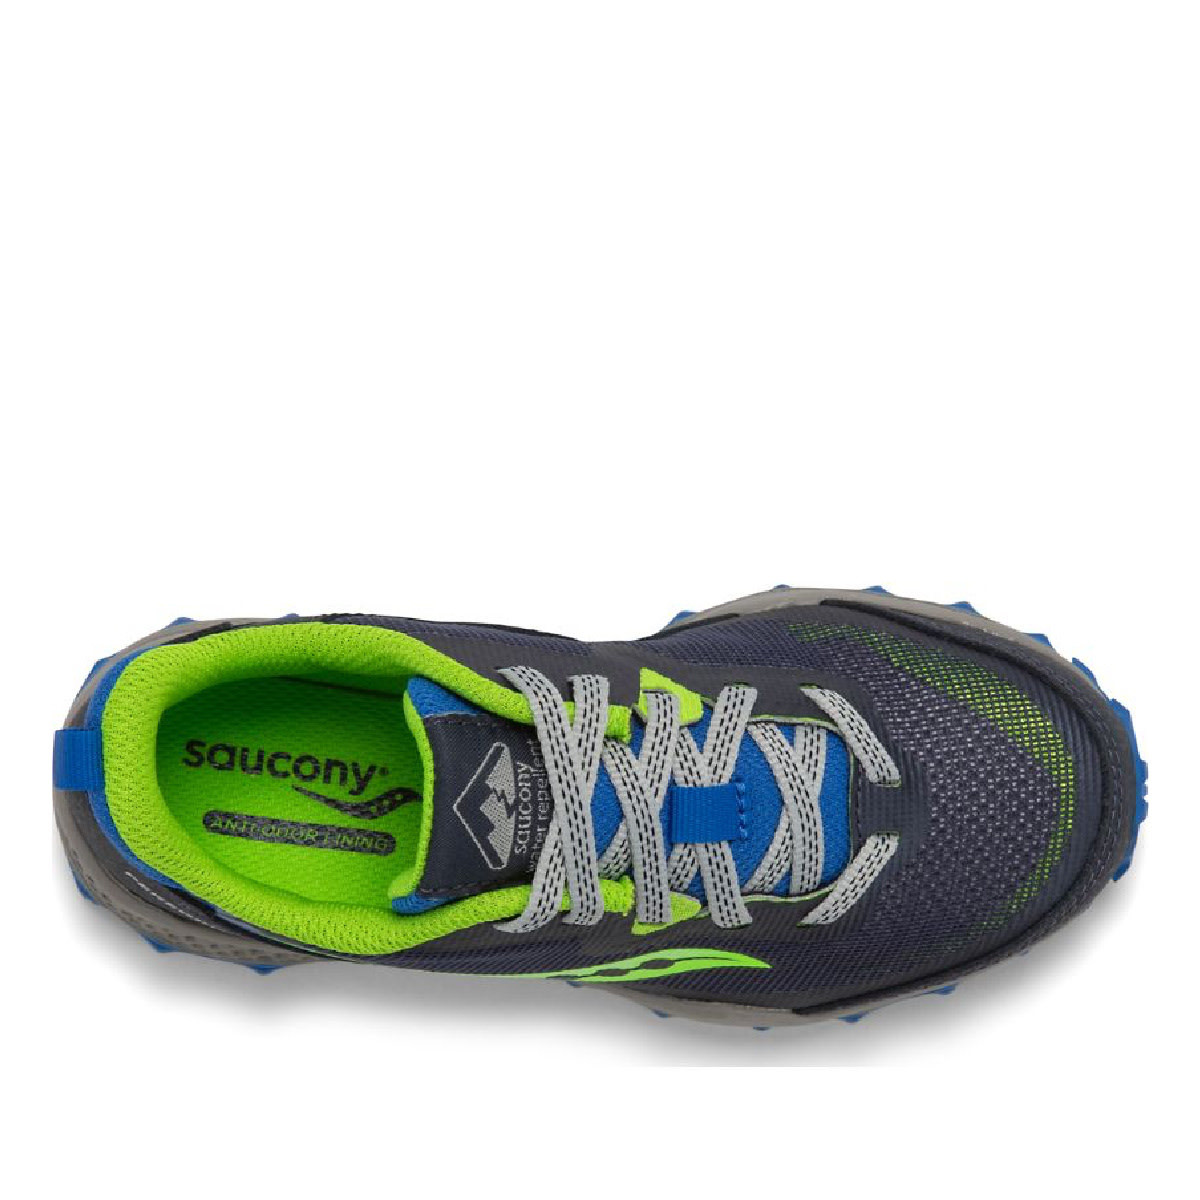 Saucony Youth Peregrine Trail Runner Blue / Green